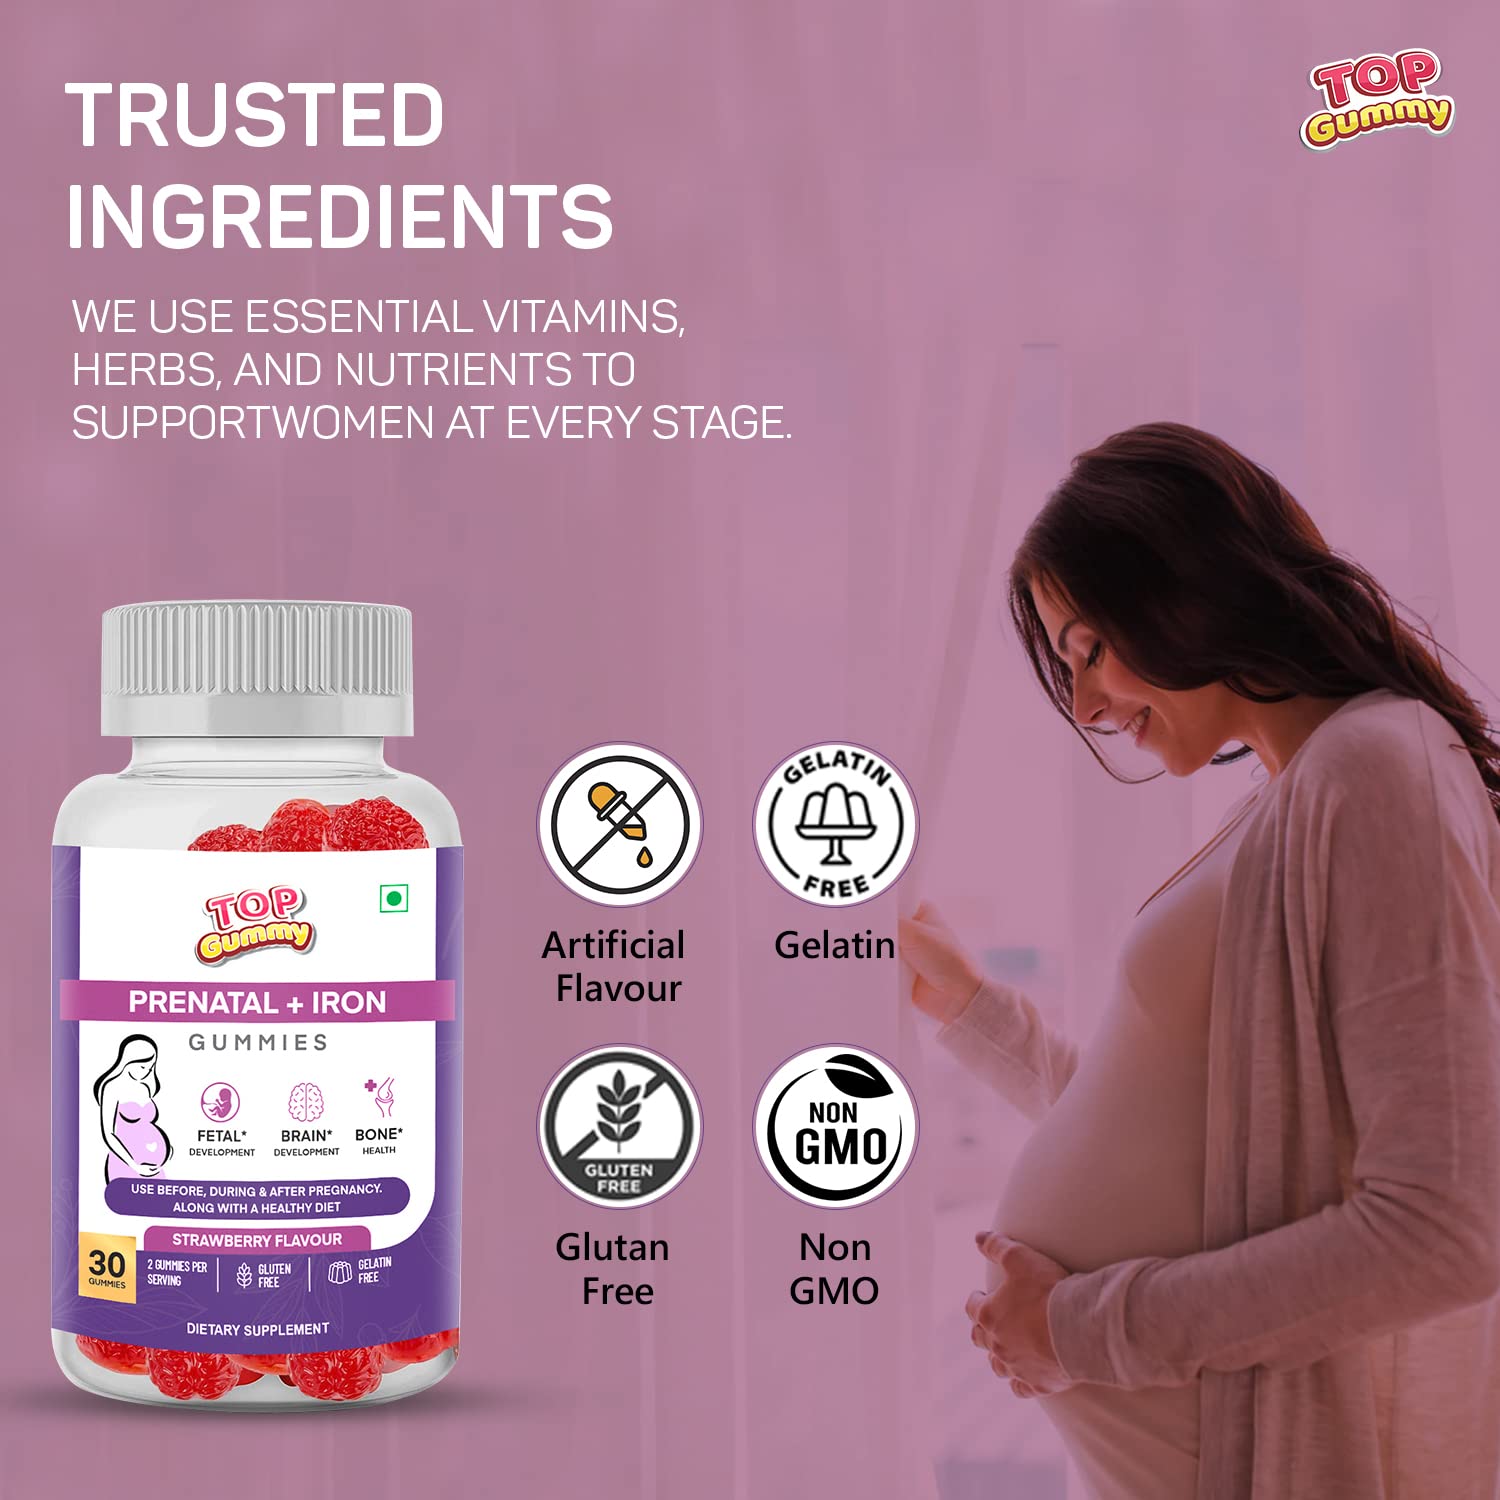 Top Gummy Prenatal + Iron with Vitamin B6, Vitamin B12 & Folic Acid | Use Before, During & After Pregnancy Along with a Healthy Diet - 30 Gummies (Strawberry Flavour) Gluten-Free (Pack of 3)